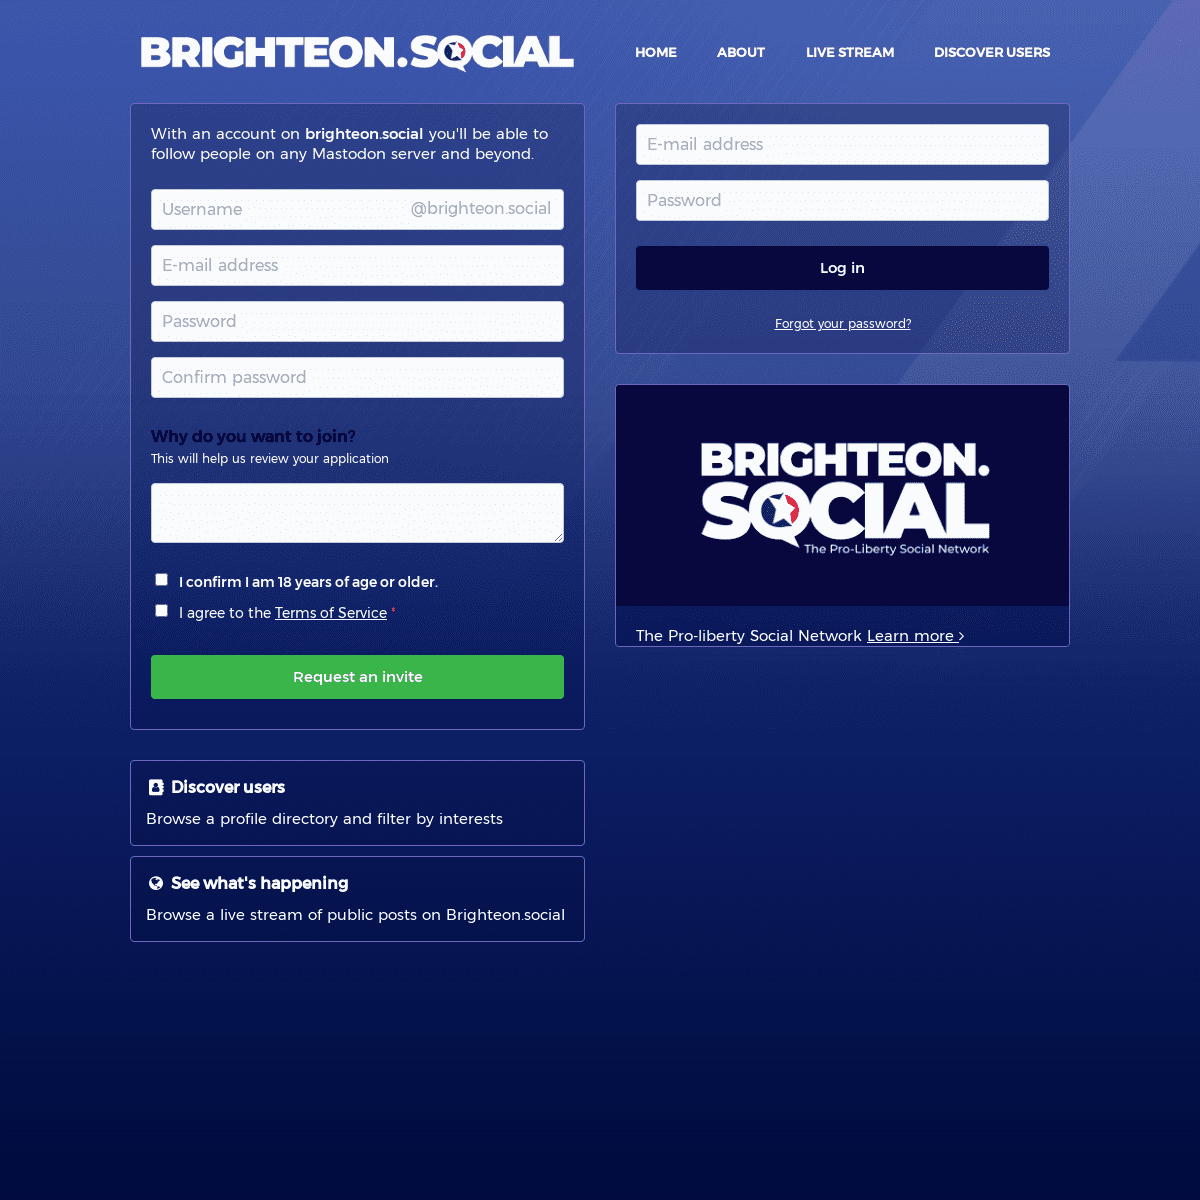 A complete backup of https://brighteon.social